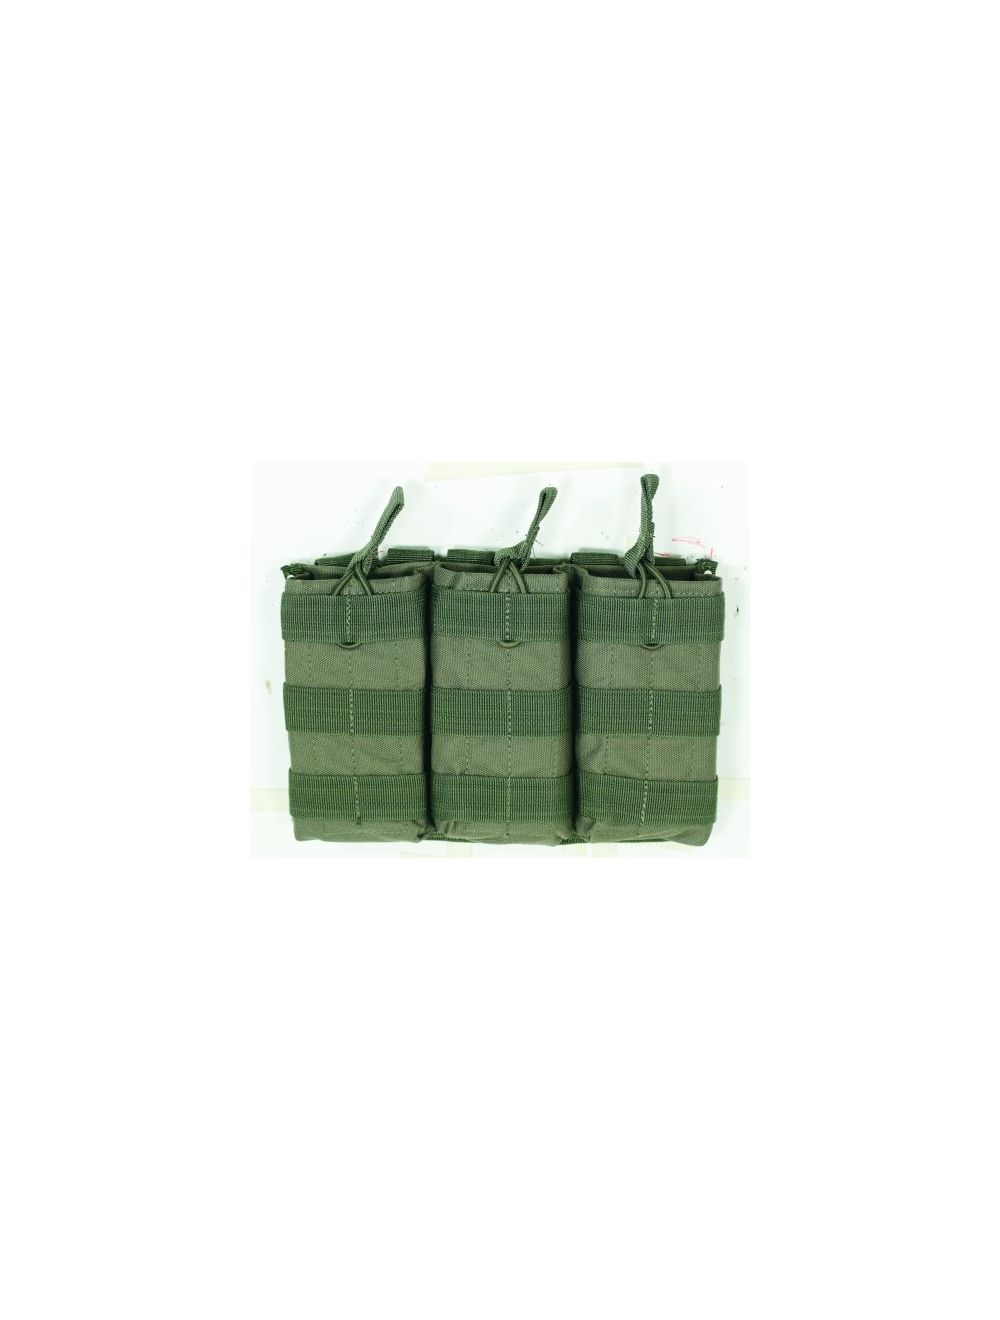 M4/M16 Open Top Mag Pouch W/ Bungee System